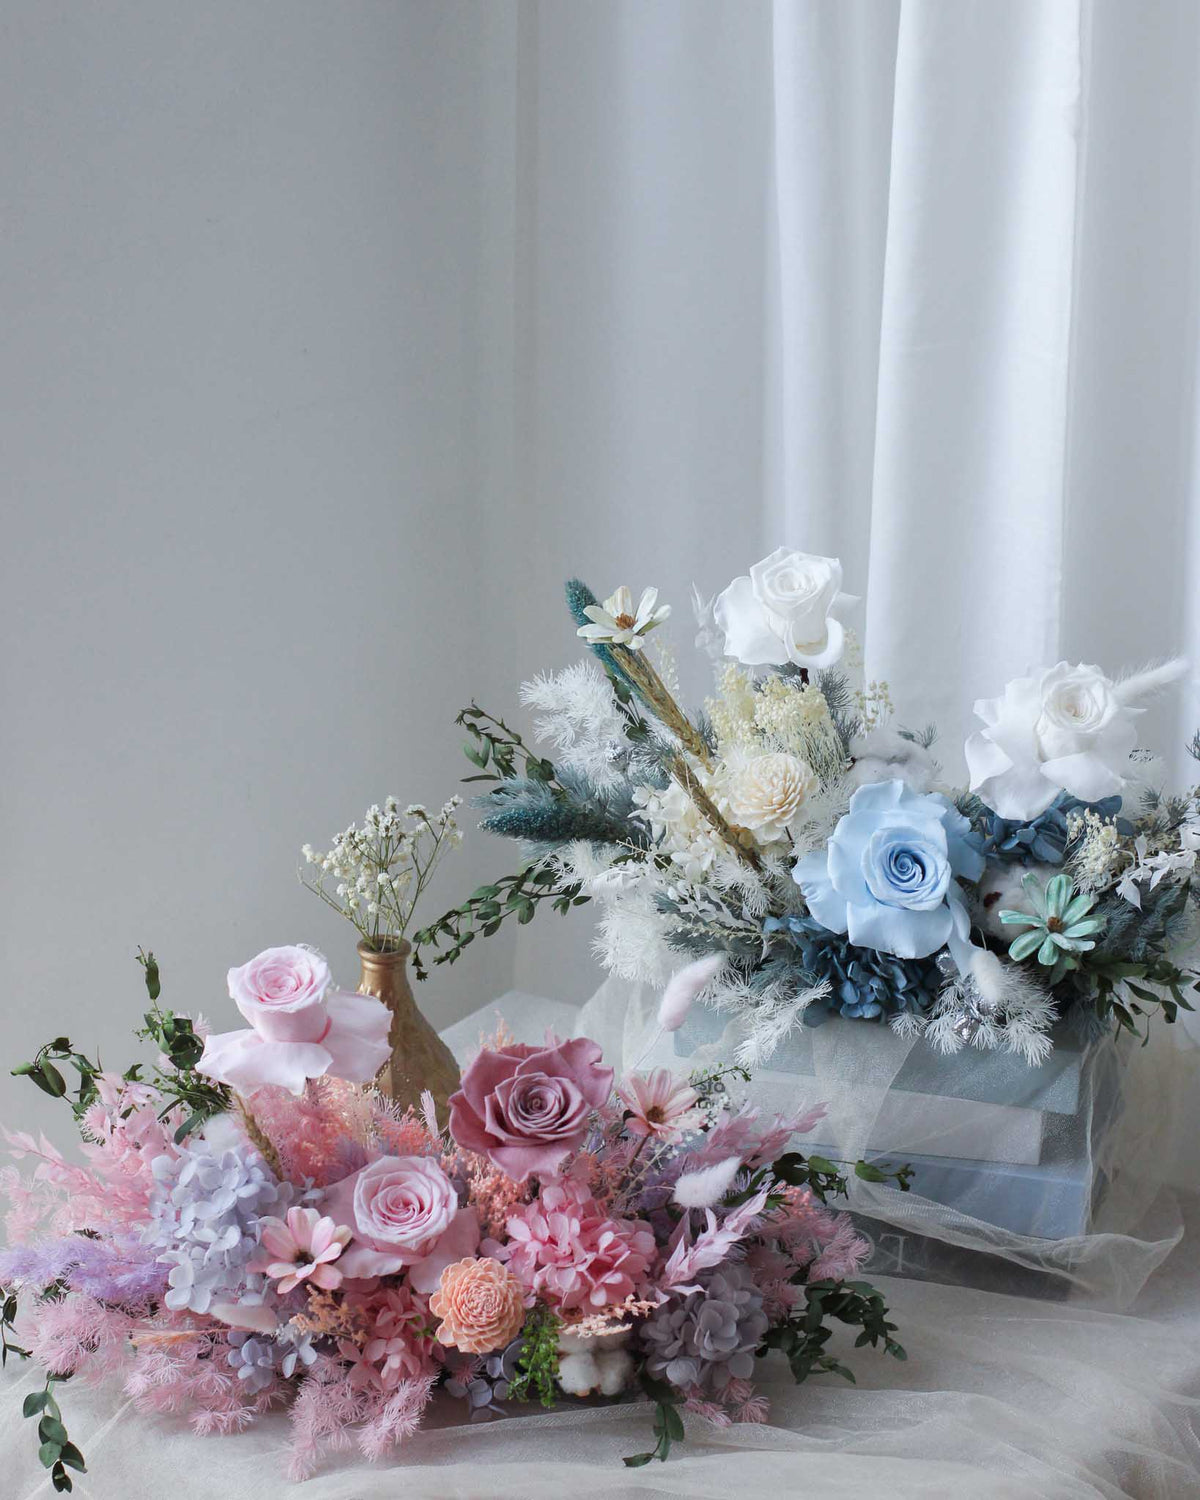 Preserved and Dried Flowers Table Centrepiece Frontal - Winter